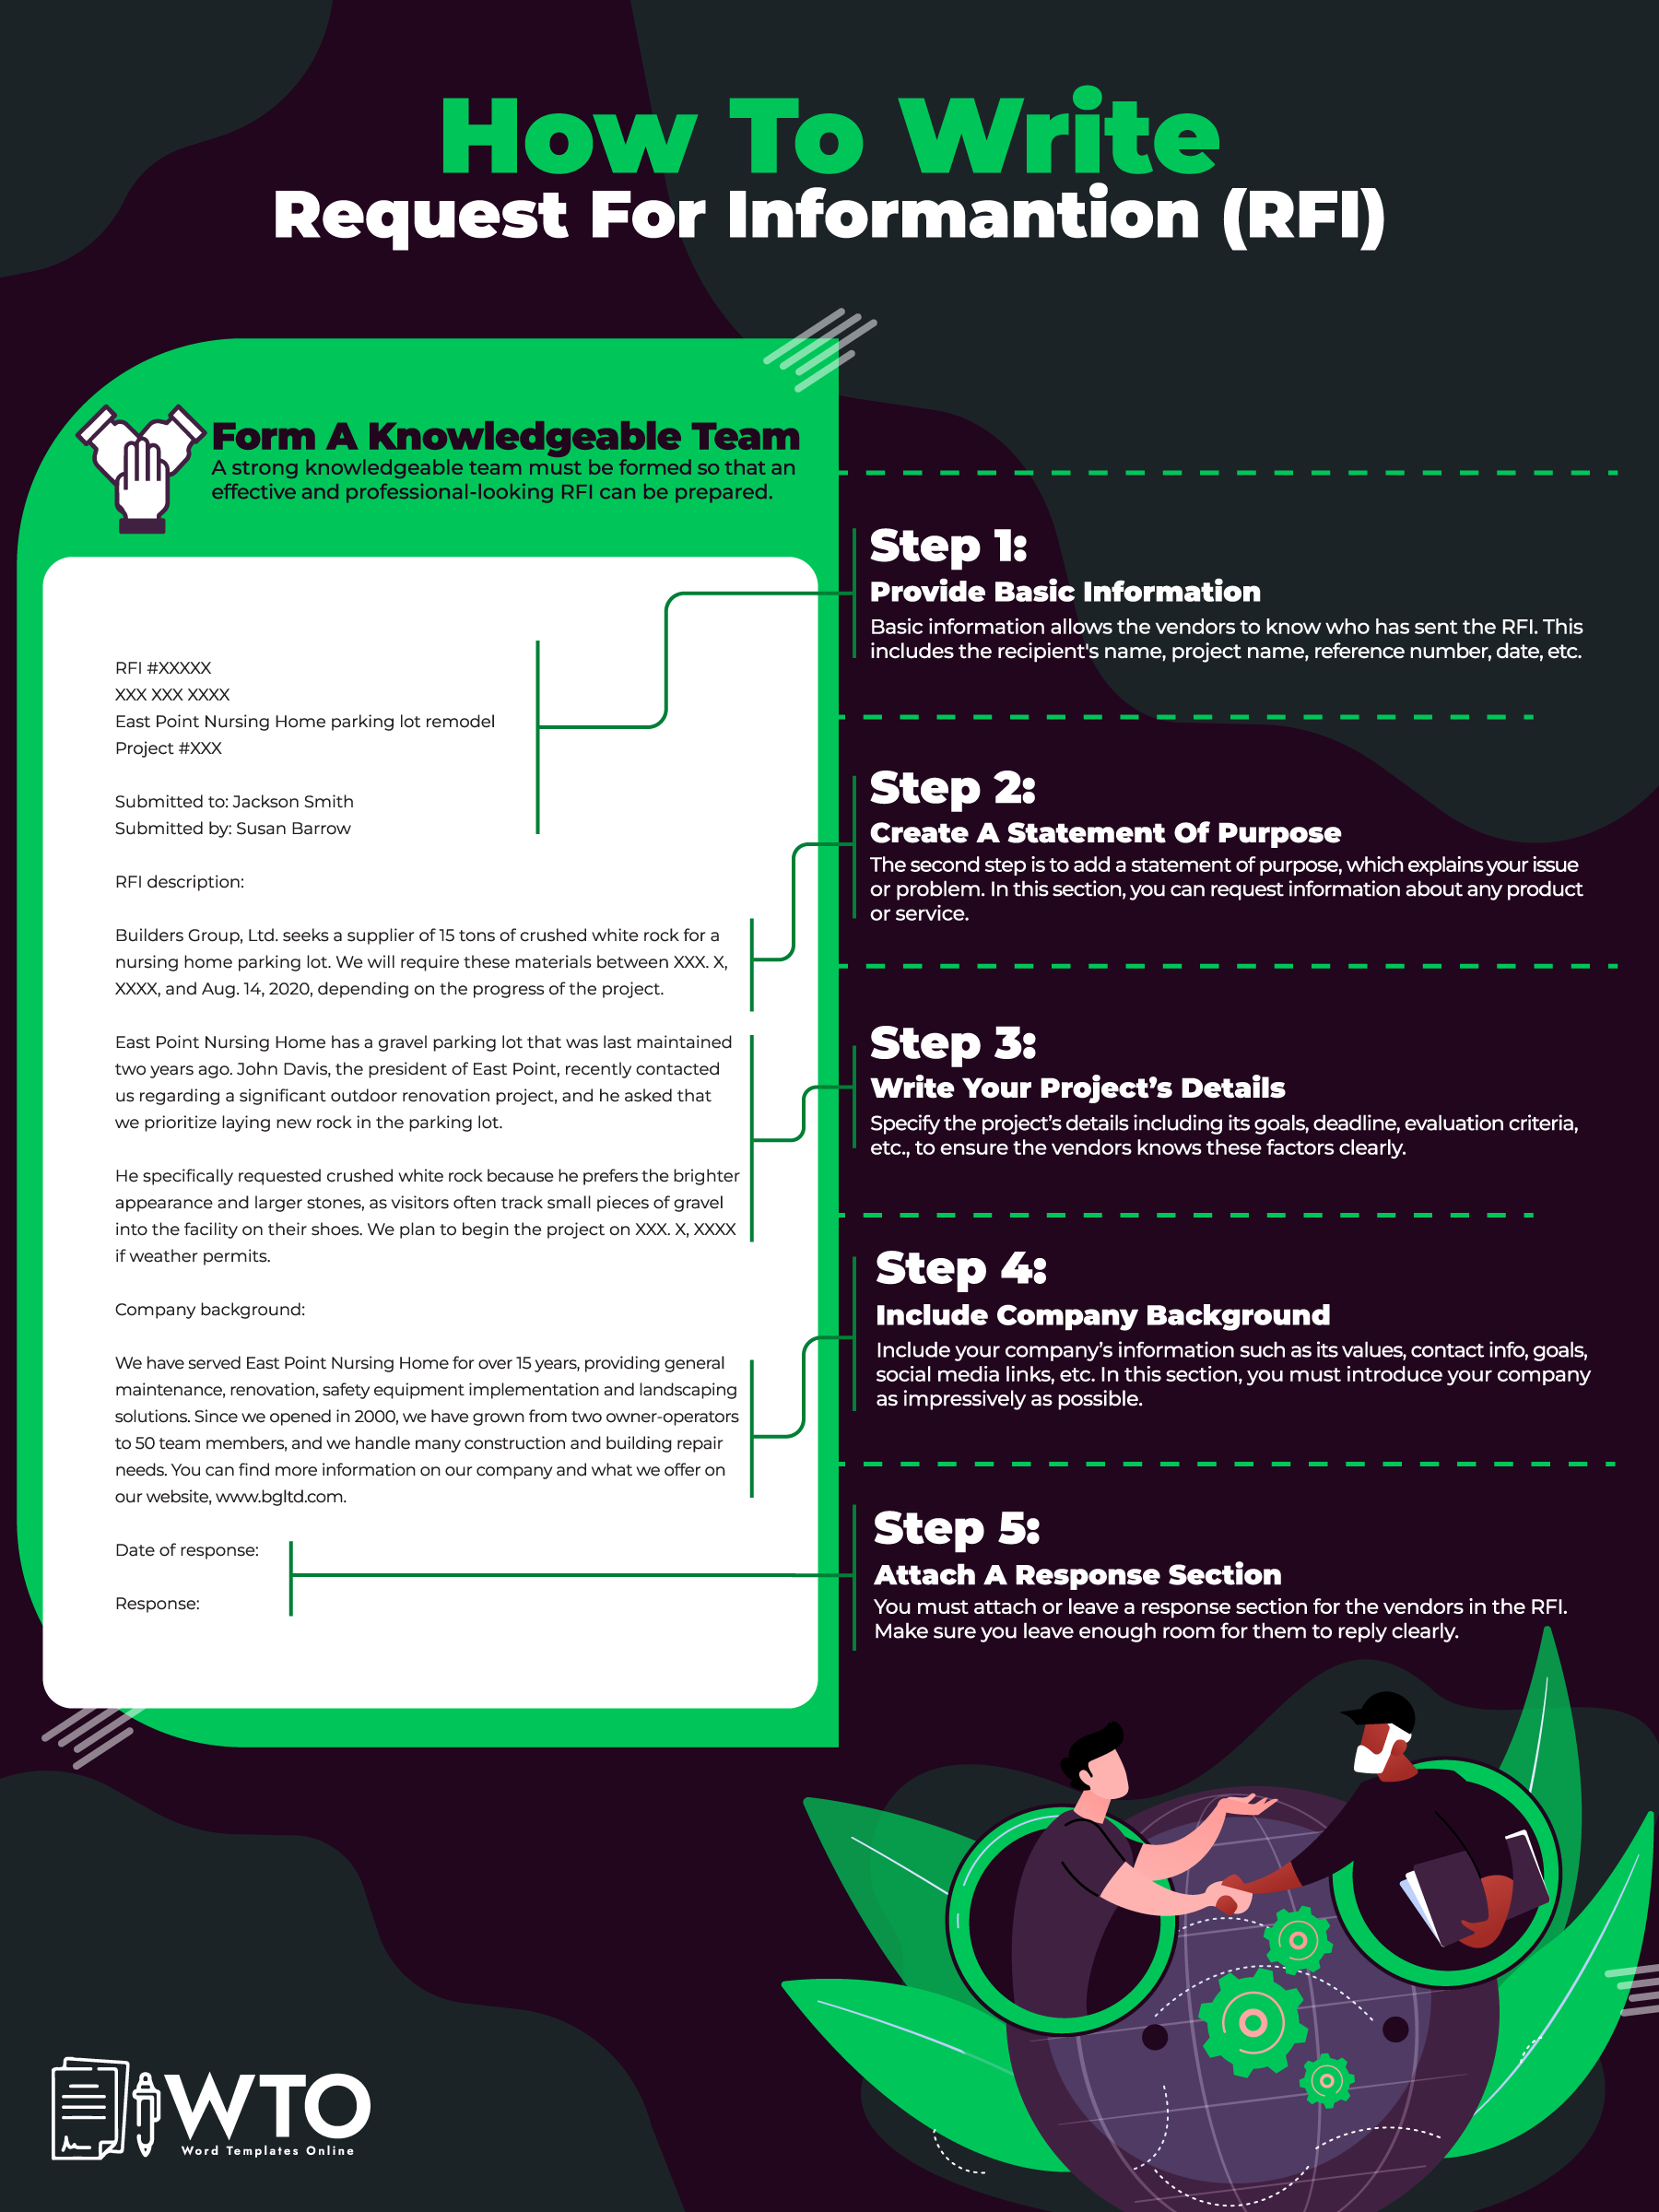 This infographic is about how to write an RFI.